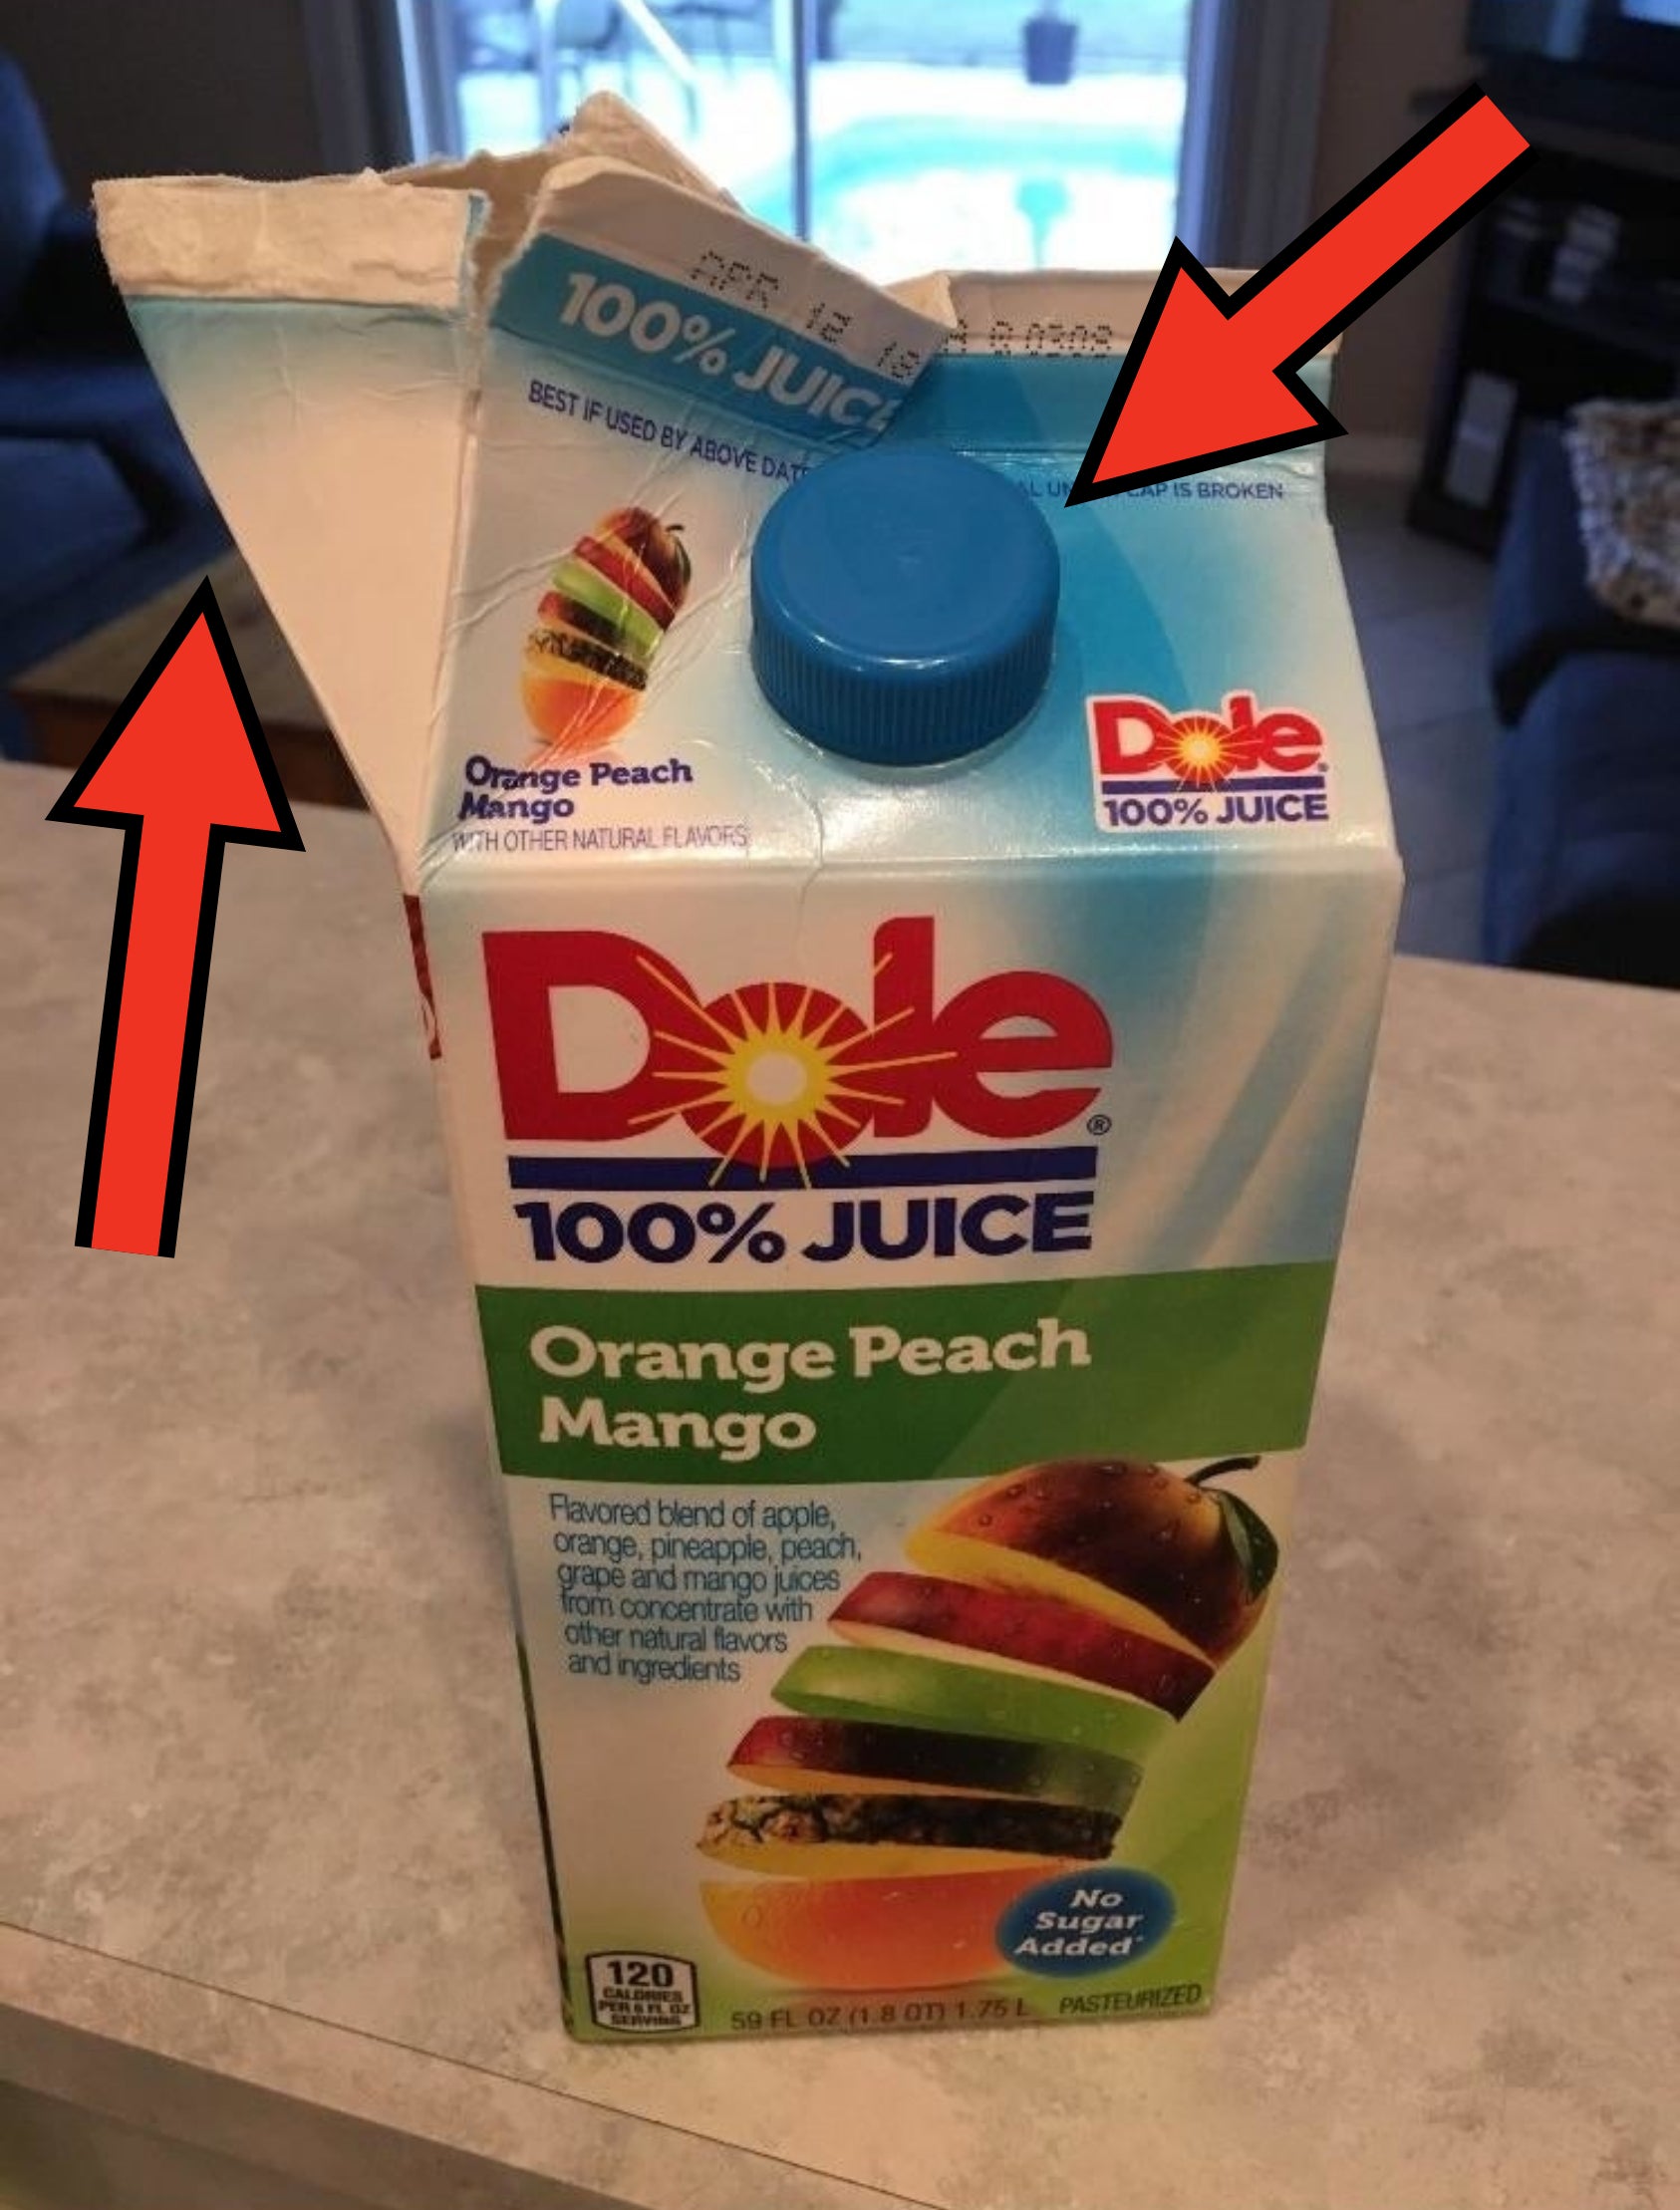 Carton of Dole 100% Juice with Orange Peach Mango flavor that has been opened incorrectly from the side